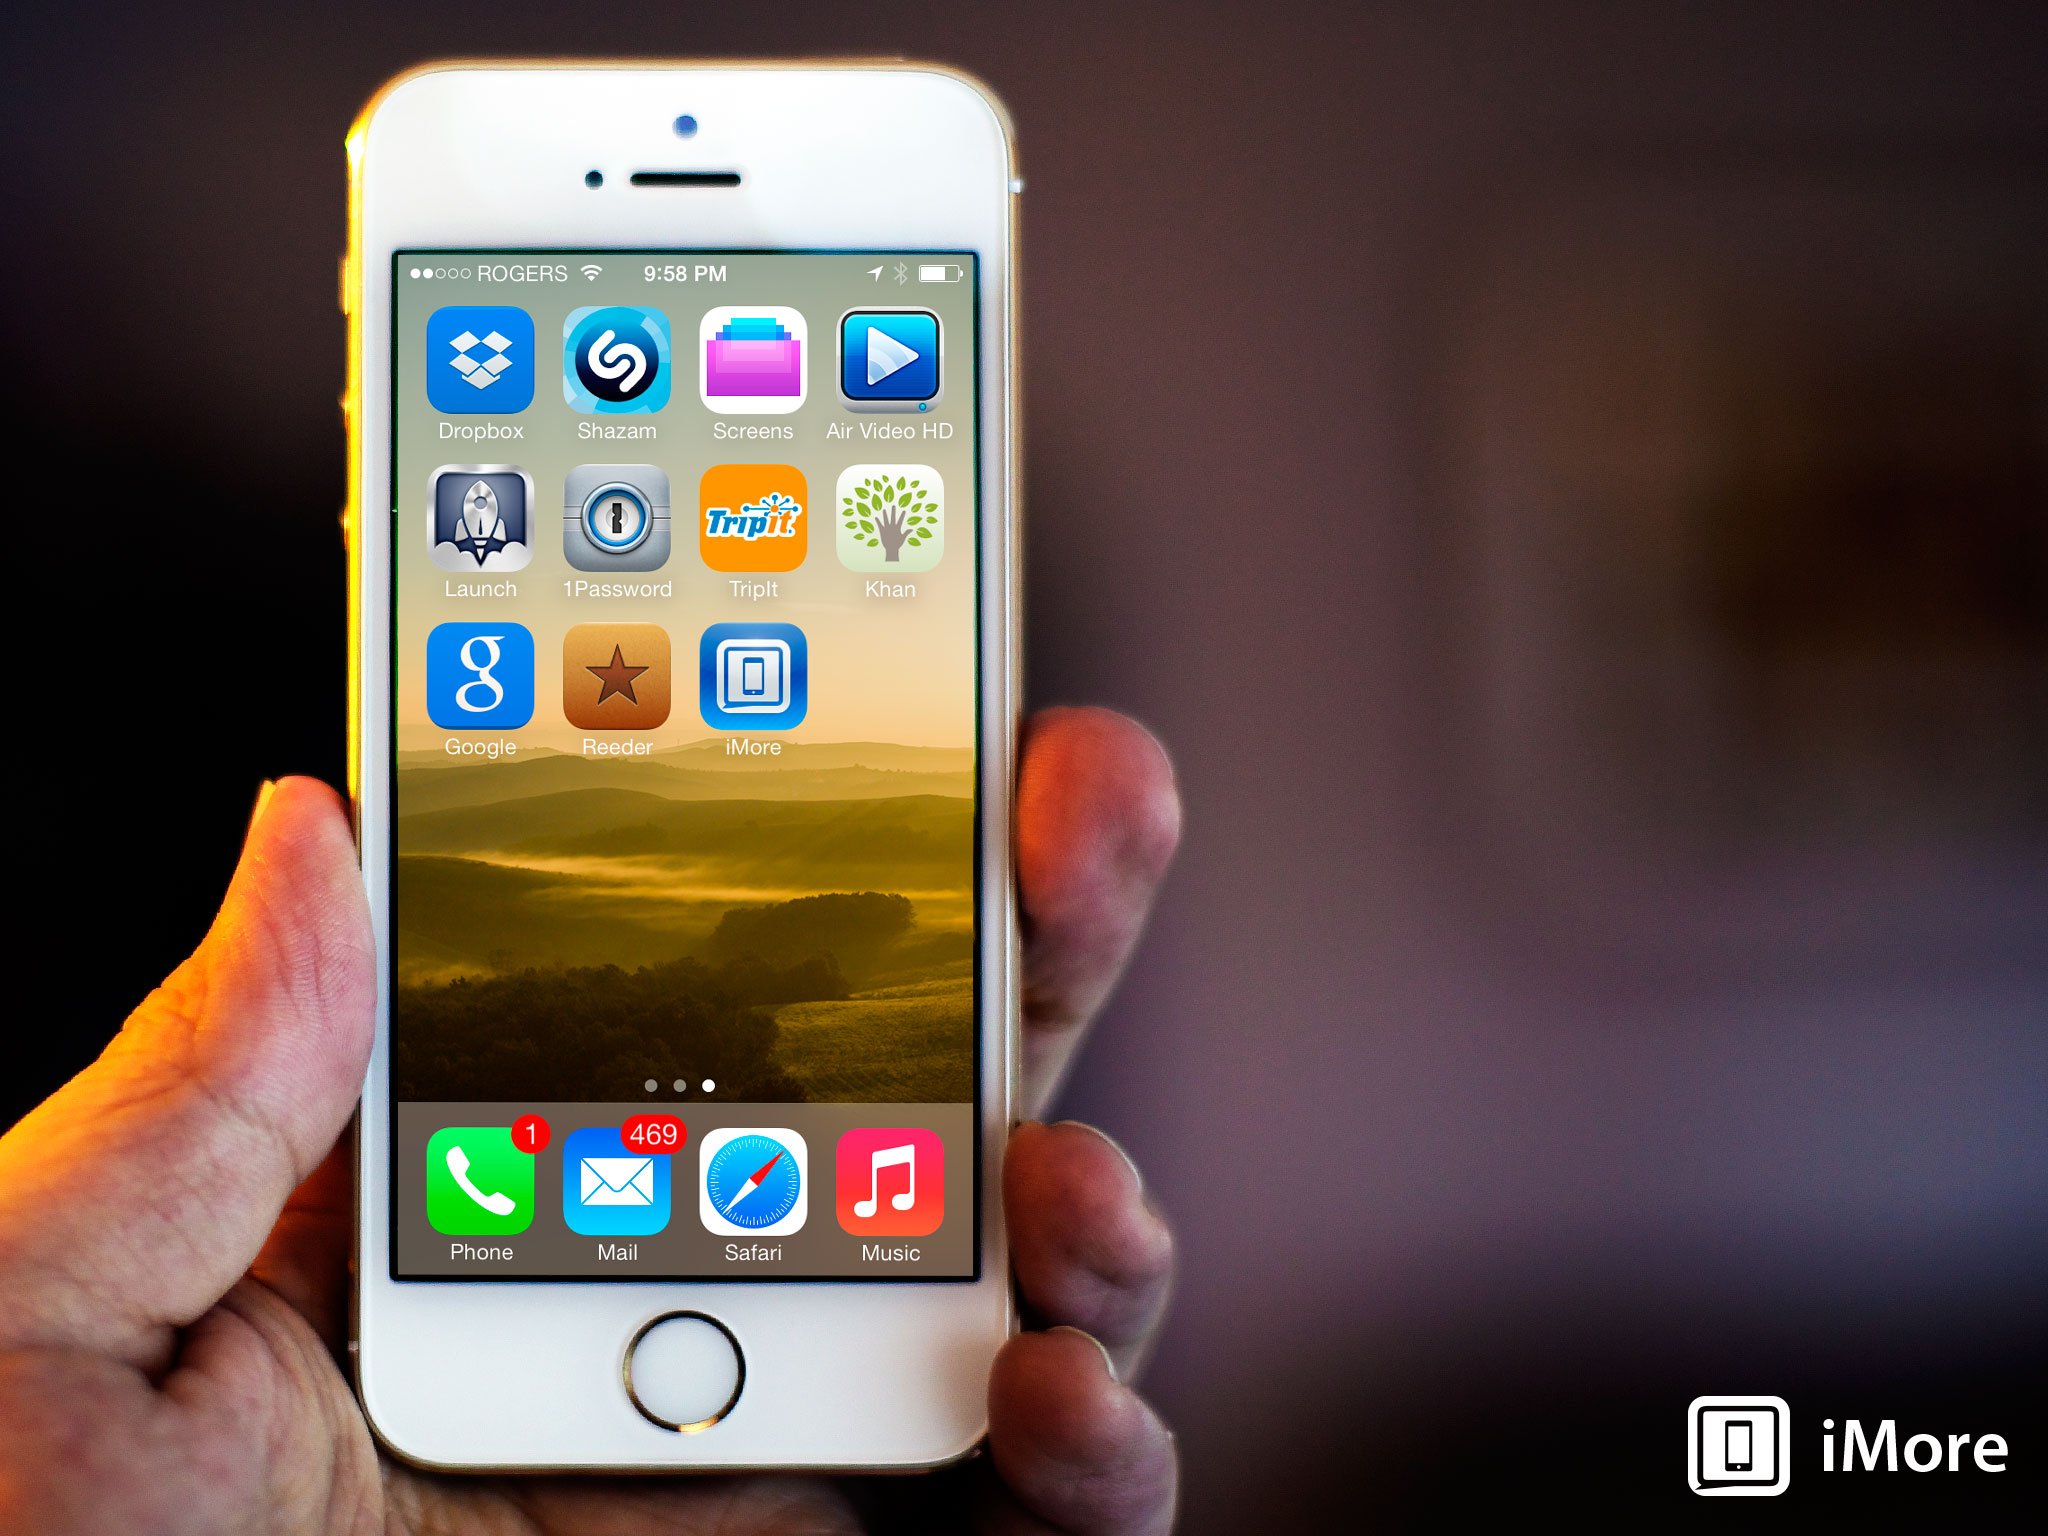 Best apps new iPhone 5s and iPhone 5c should download right now!